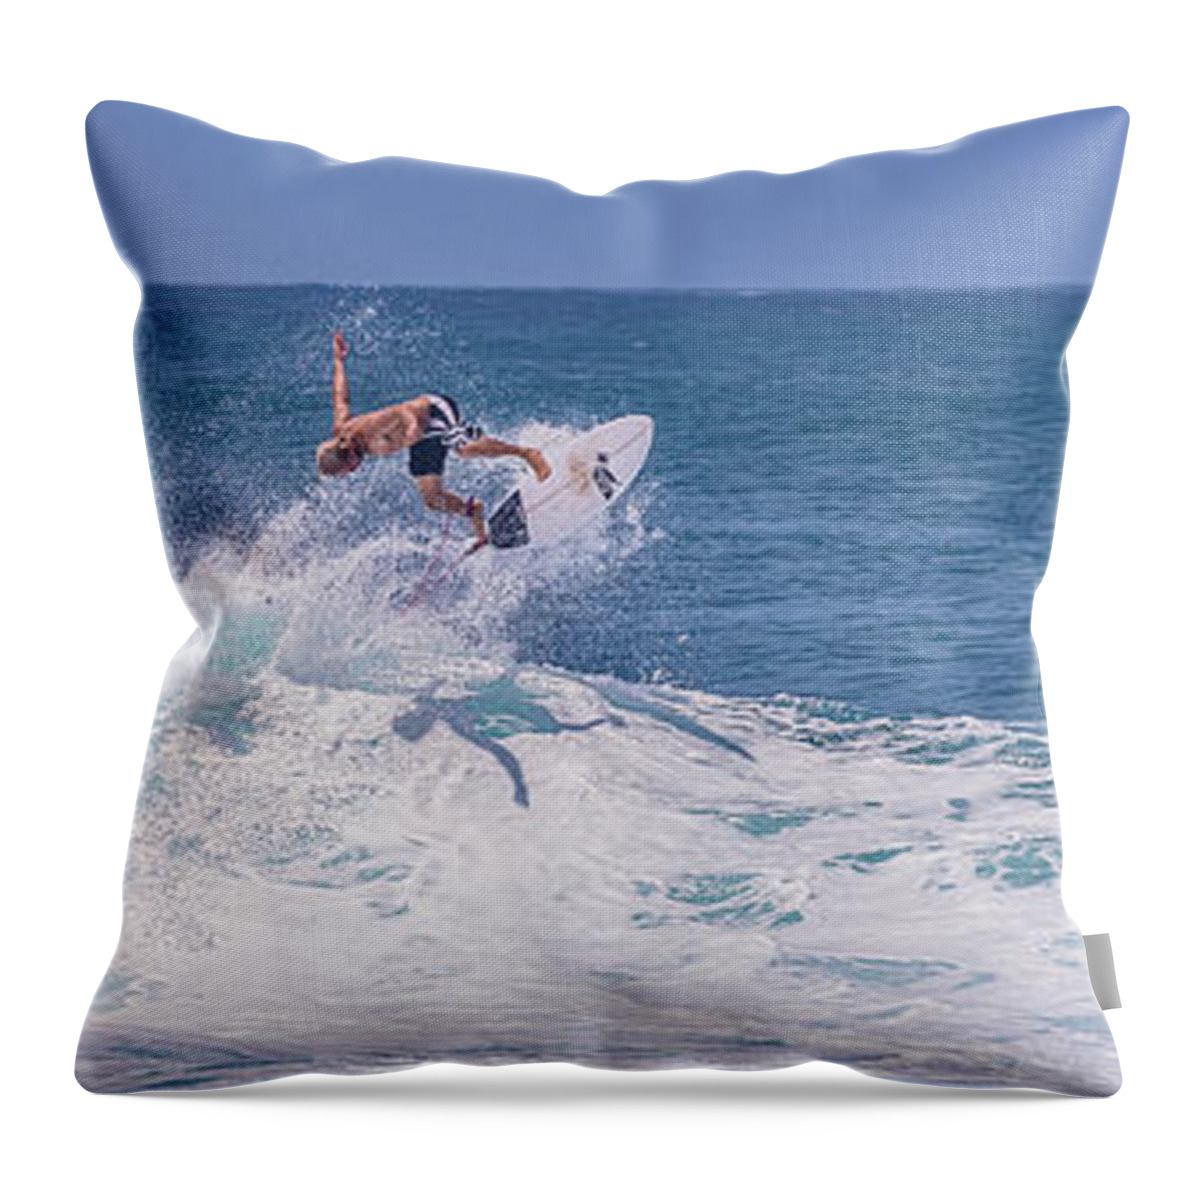 Banzai Pipeline Throw Pillow featuring the photograph Banzai Pipeline Up in the Air by Aloha Art